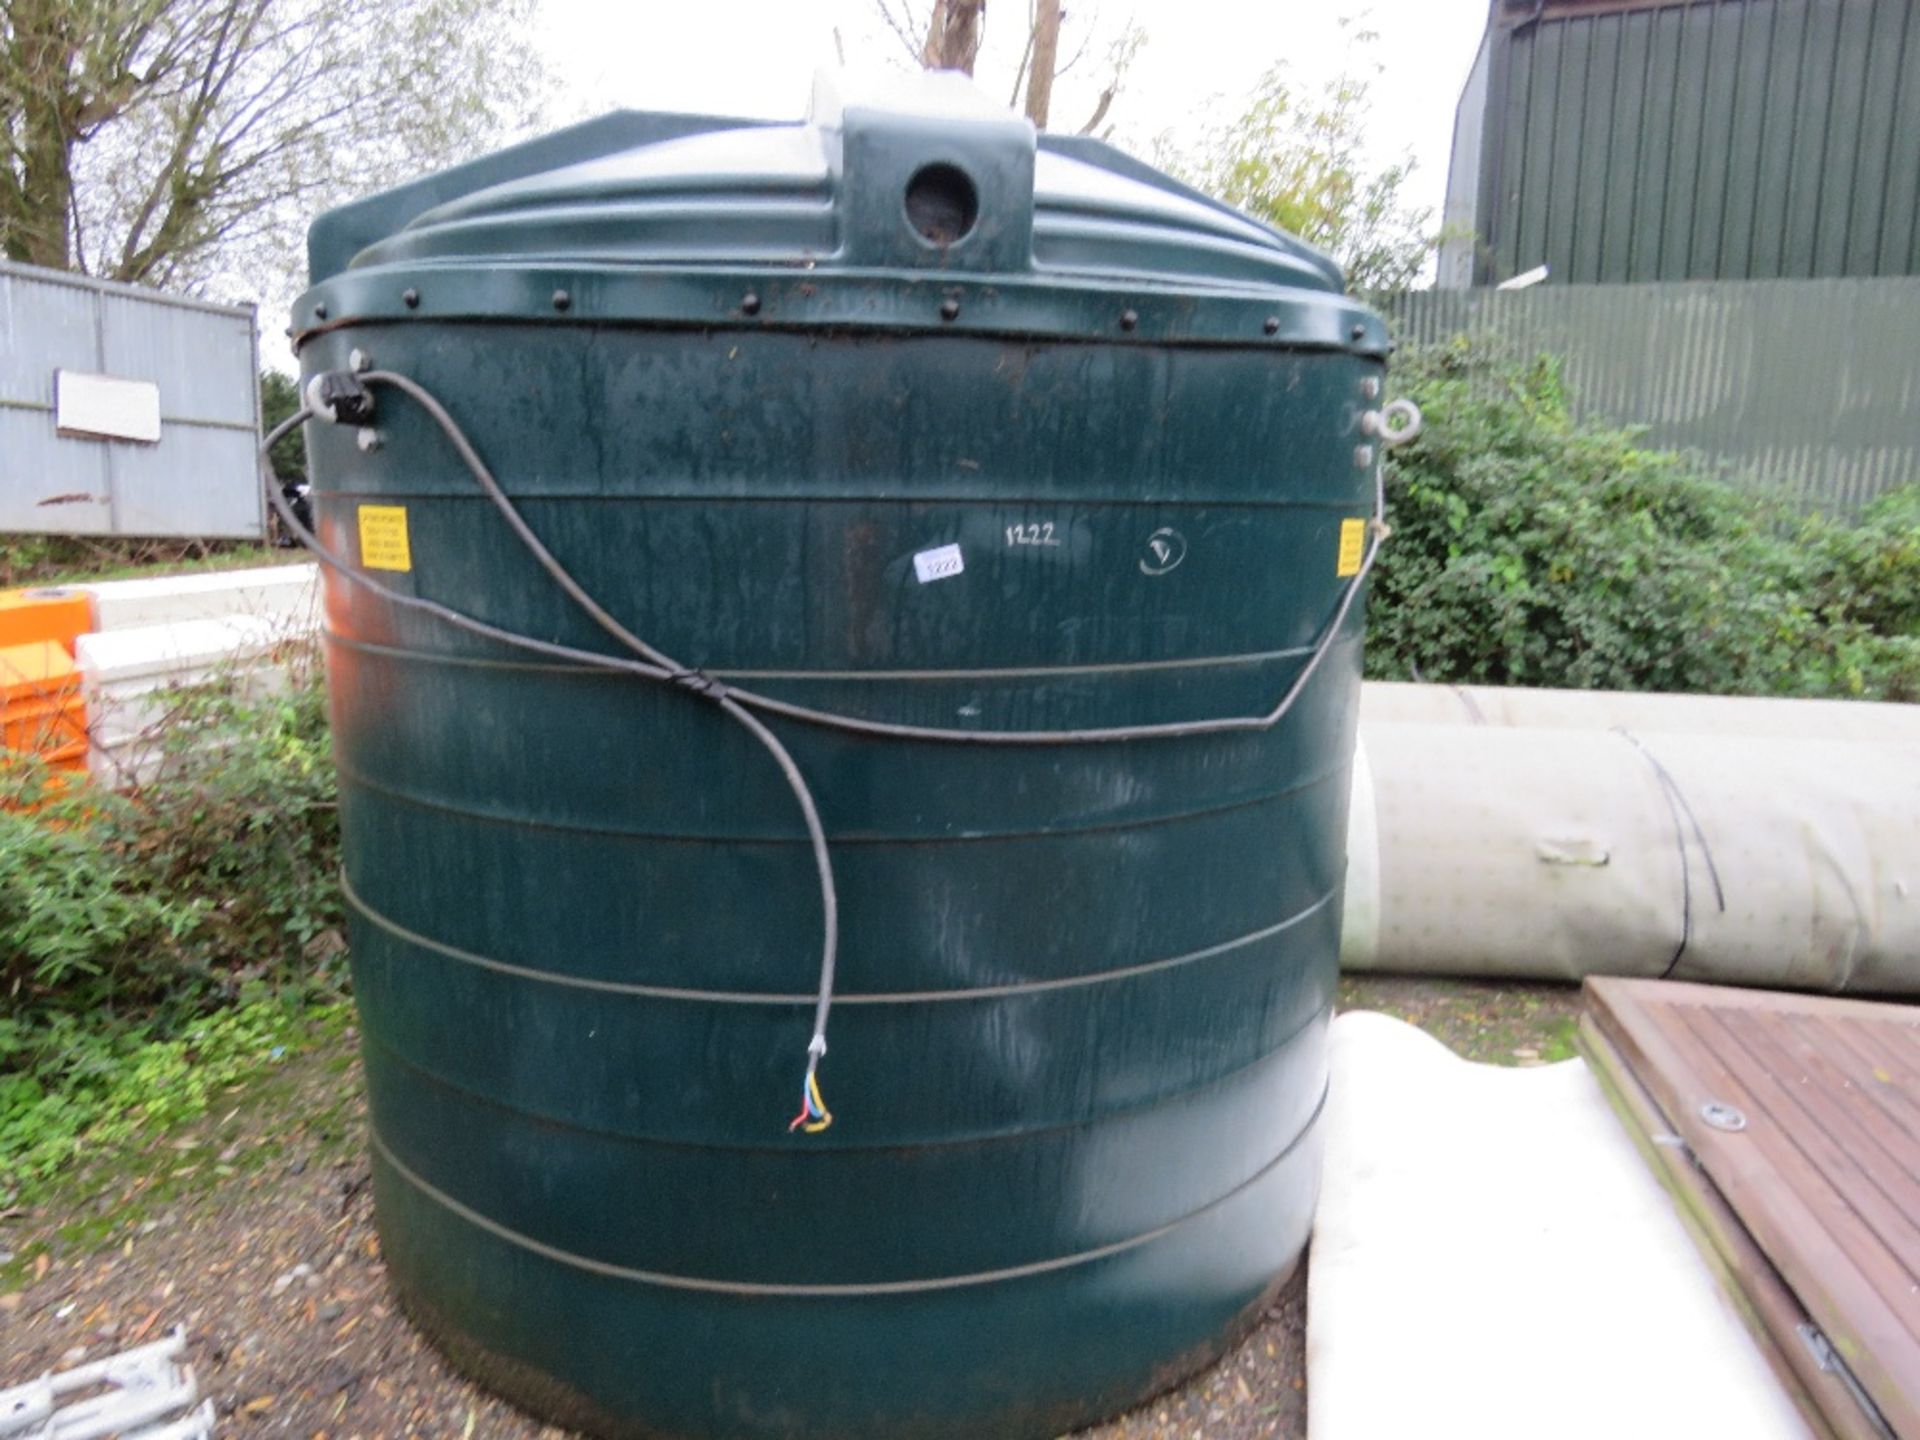 HARLEQUIN 5000FS FUEL STATION BUNDED TANK WITH 240VOLT PUMP. PREVIOUSLY USED FOR WHITE DIESEL. DIR